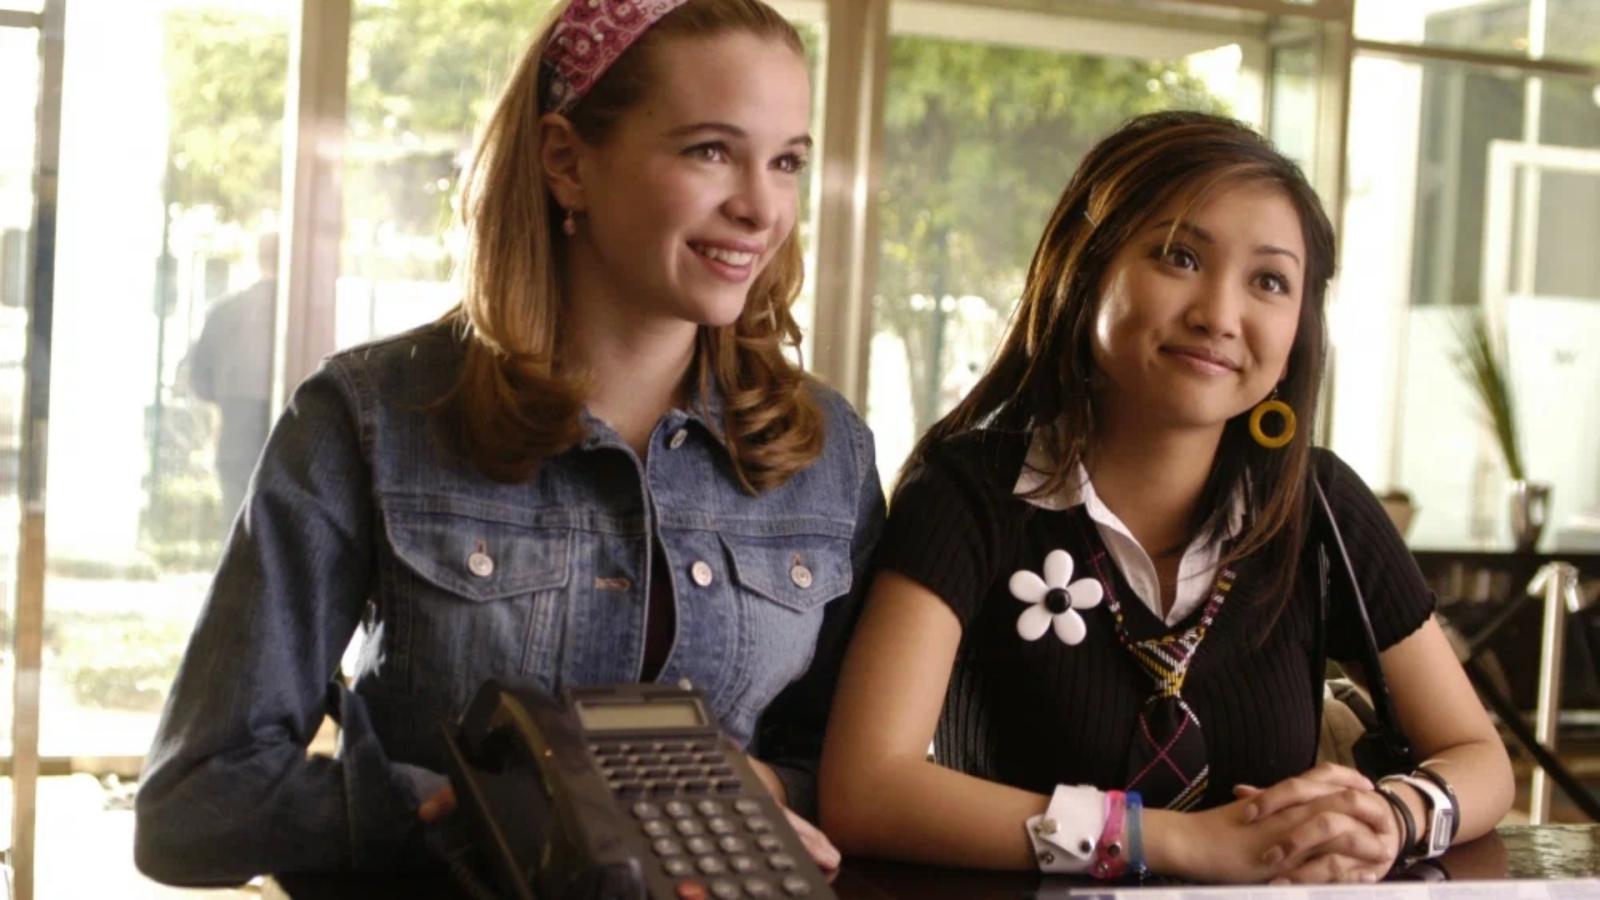 15 Wholesome Disney Channel Movies Surprisingly Watchable For Adults, Too - image 6